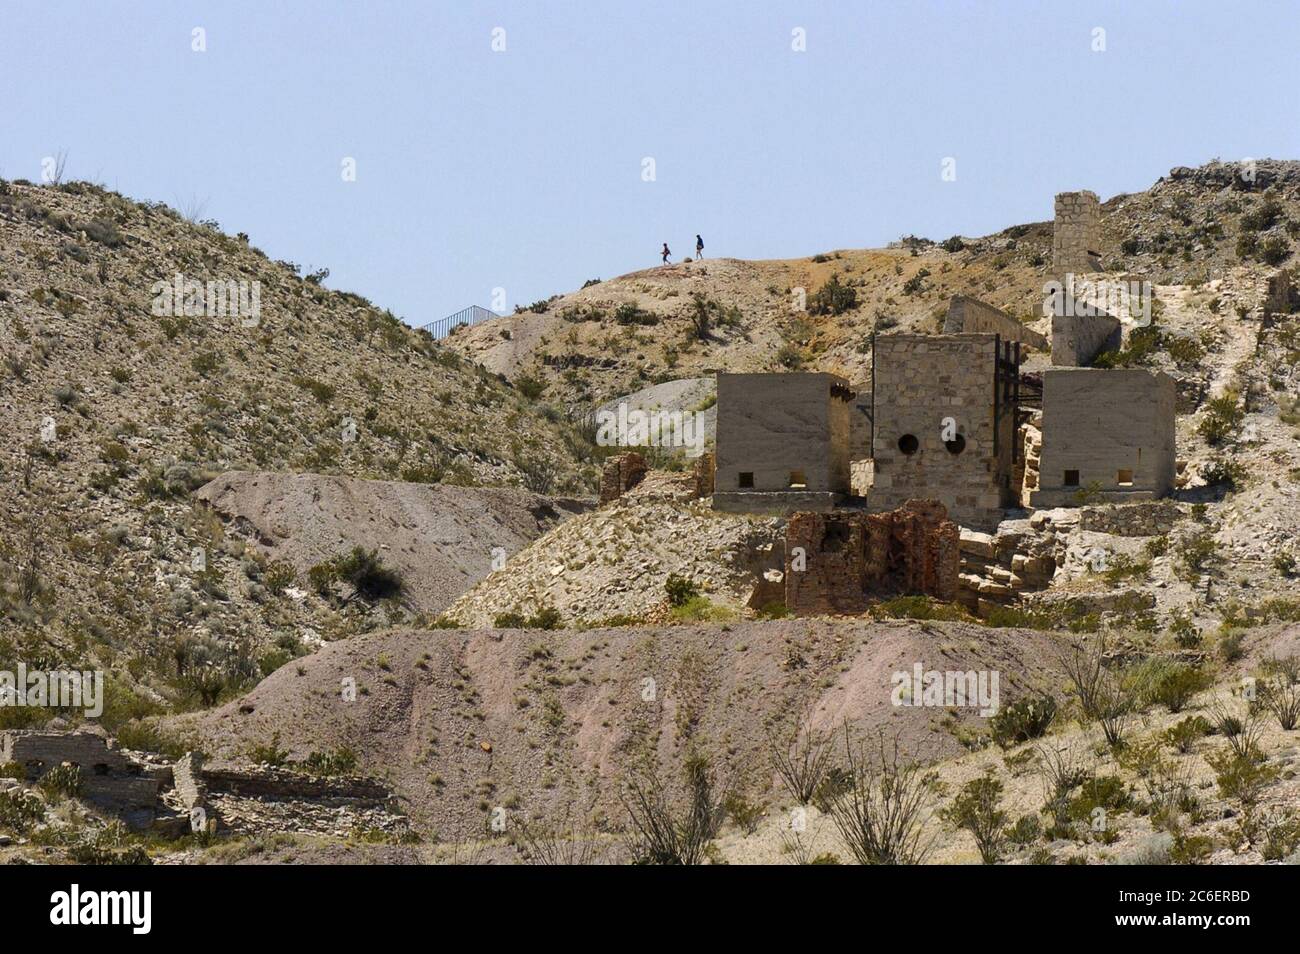 Big Bend National Park, Texas USA, March 2005  The ruins of Mariscal Mine and nearby adobe houses dot the landscape along the Glenn Springs Road where the mercury and quicksilver mine remained active until the mid-1920's, before Big Bend became a national park. ©Bob Daemmrich Stock Photo